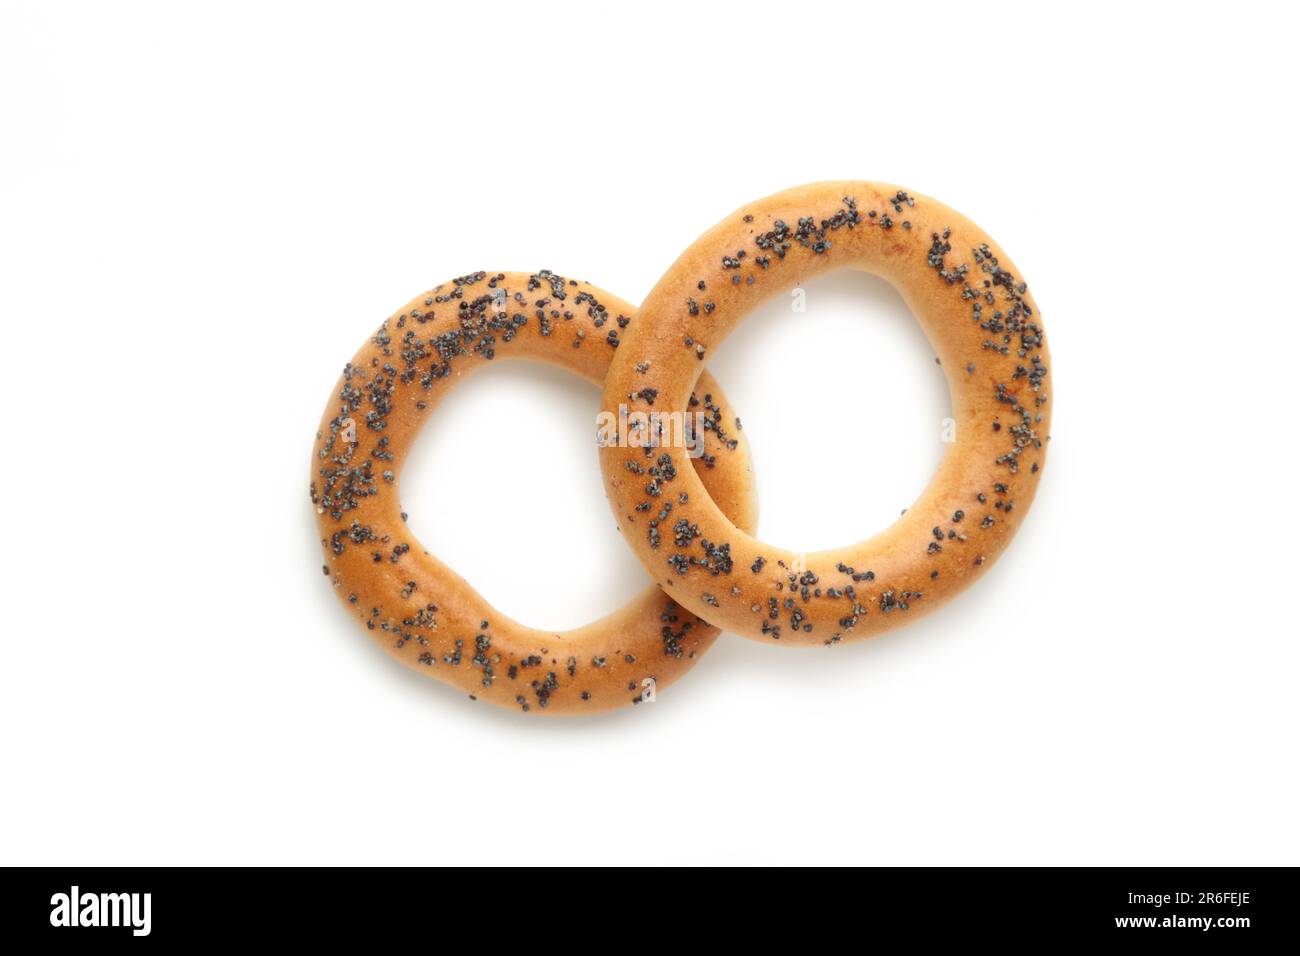 Whole bagel with poppy seeds isolated on white background. Top view Stock Photo